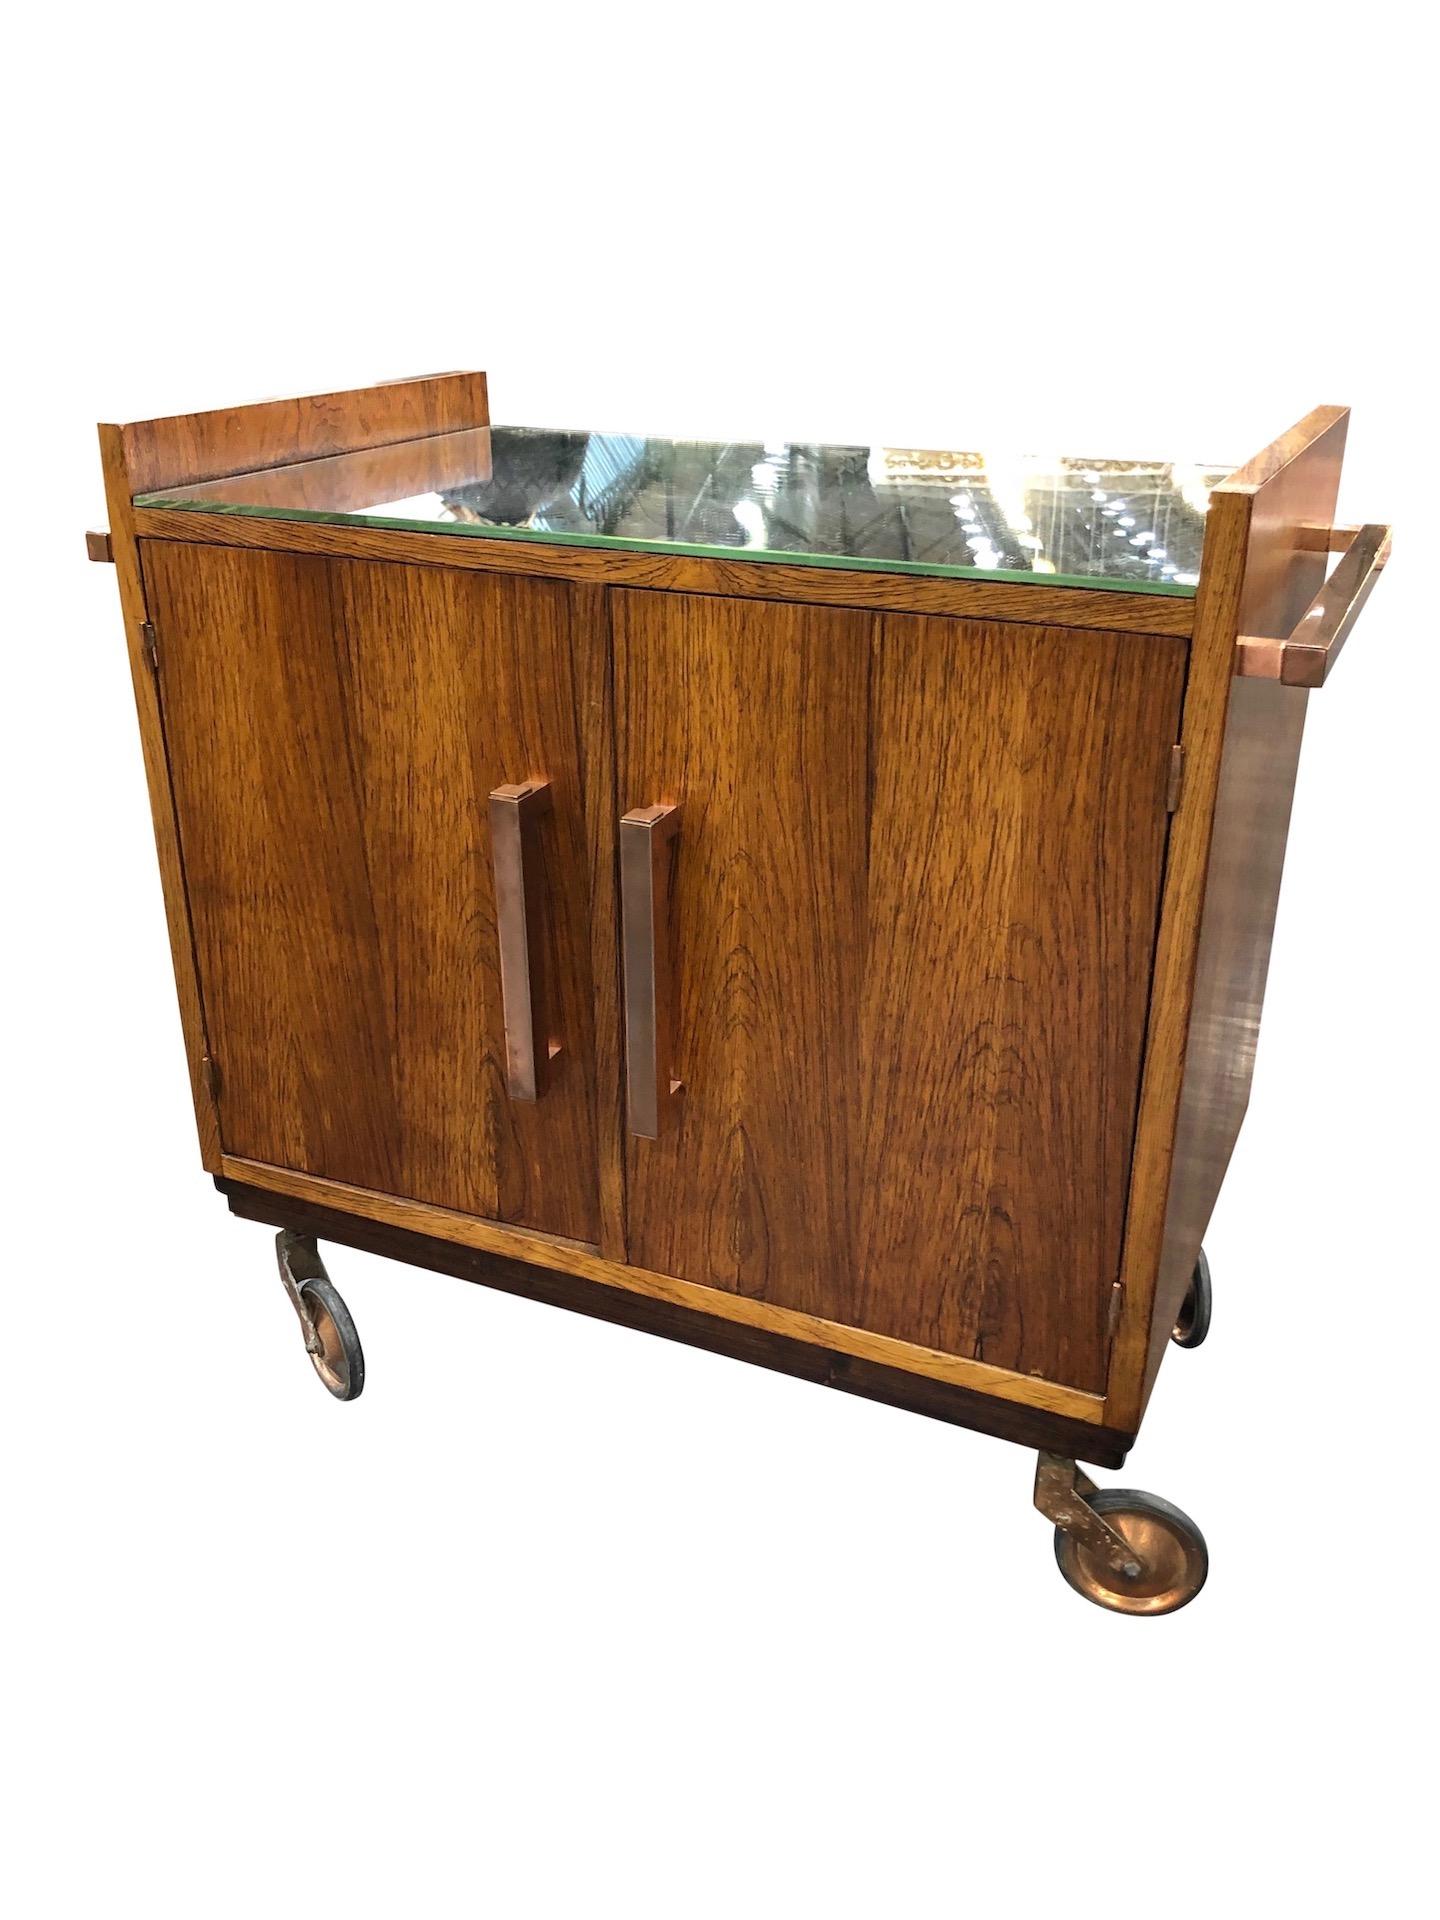 Art Deco bar trolley in style of Jacques Adnet 
Real wood veneer 
Handles and wheels in copper
To open on one side with double doors
Tabletop with old mirror (blind spots)
New mirror-tablet inside
Original Art Deco, France, 1930s 

Heavy! >>